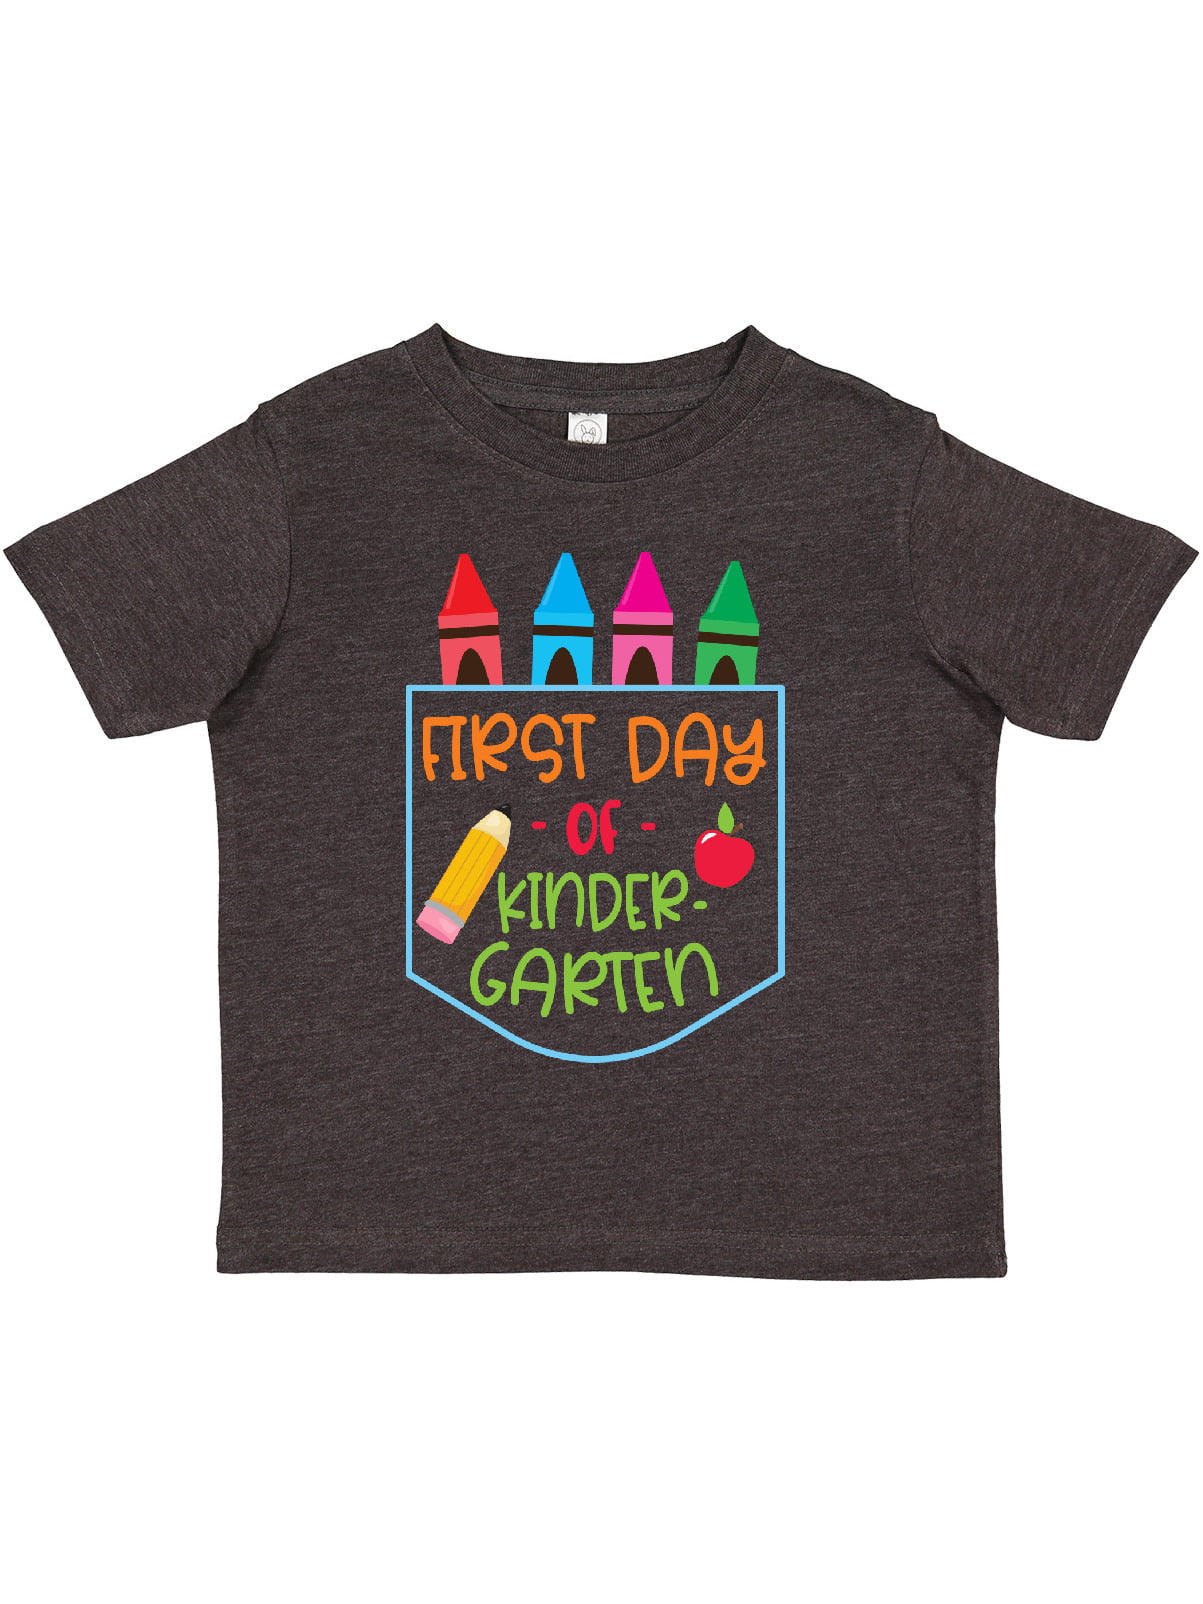 The World is my School Toddler Tee